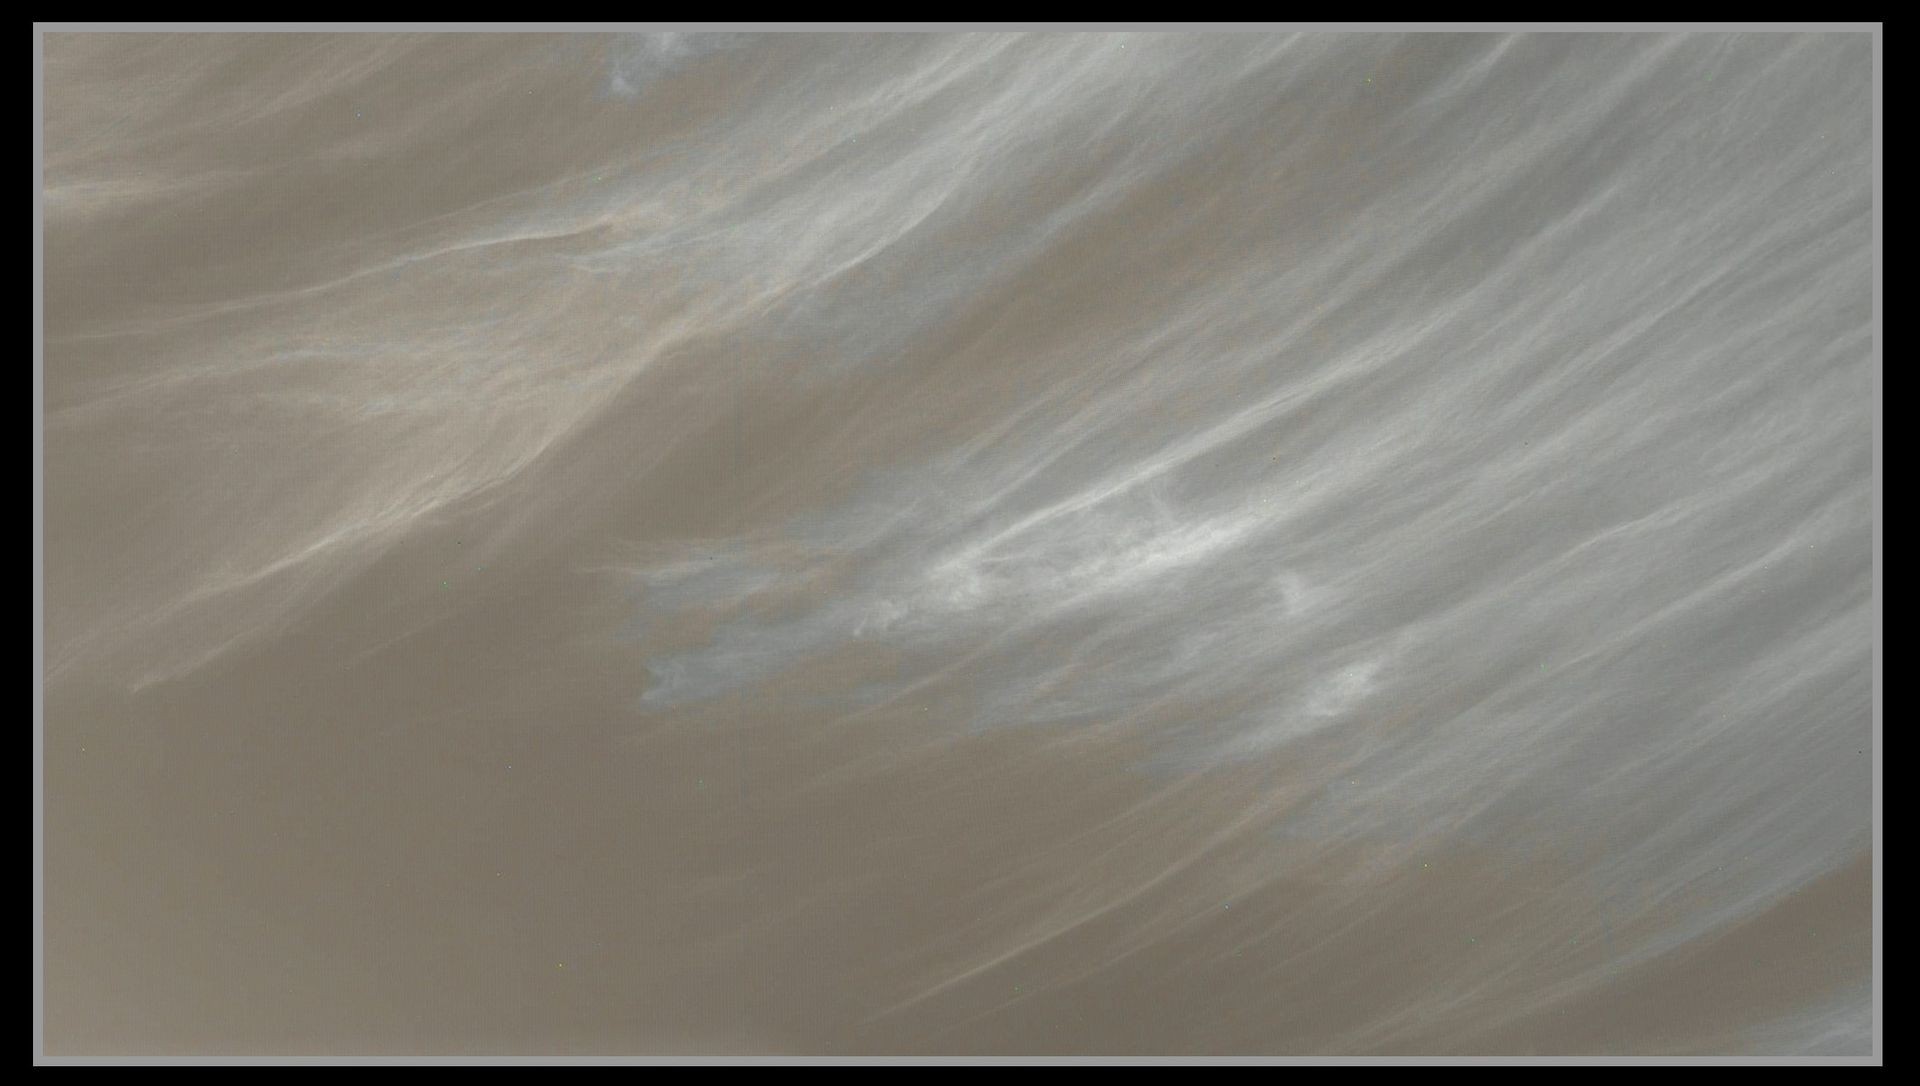 Thin wipsy white clouds agains a dusty Martian sky.